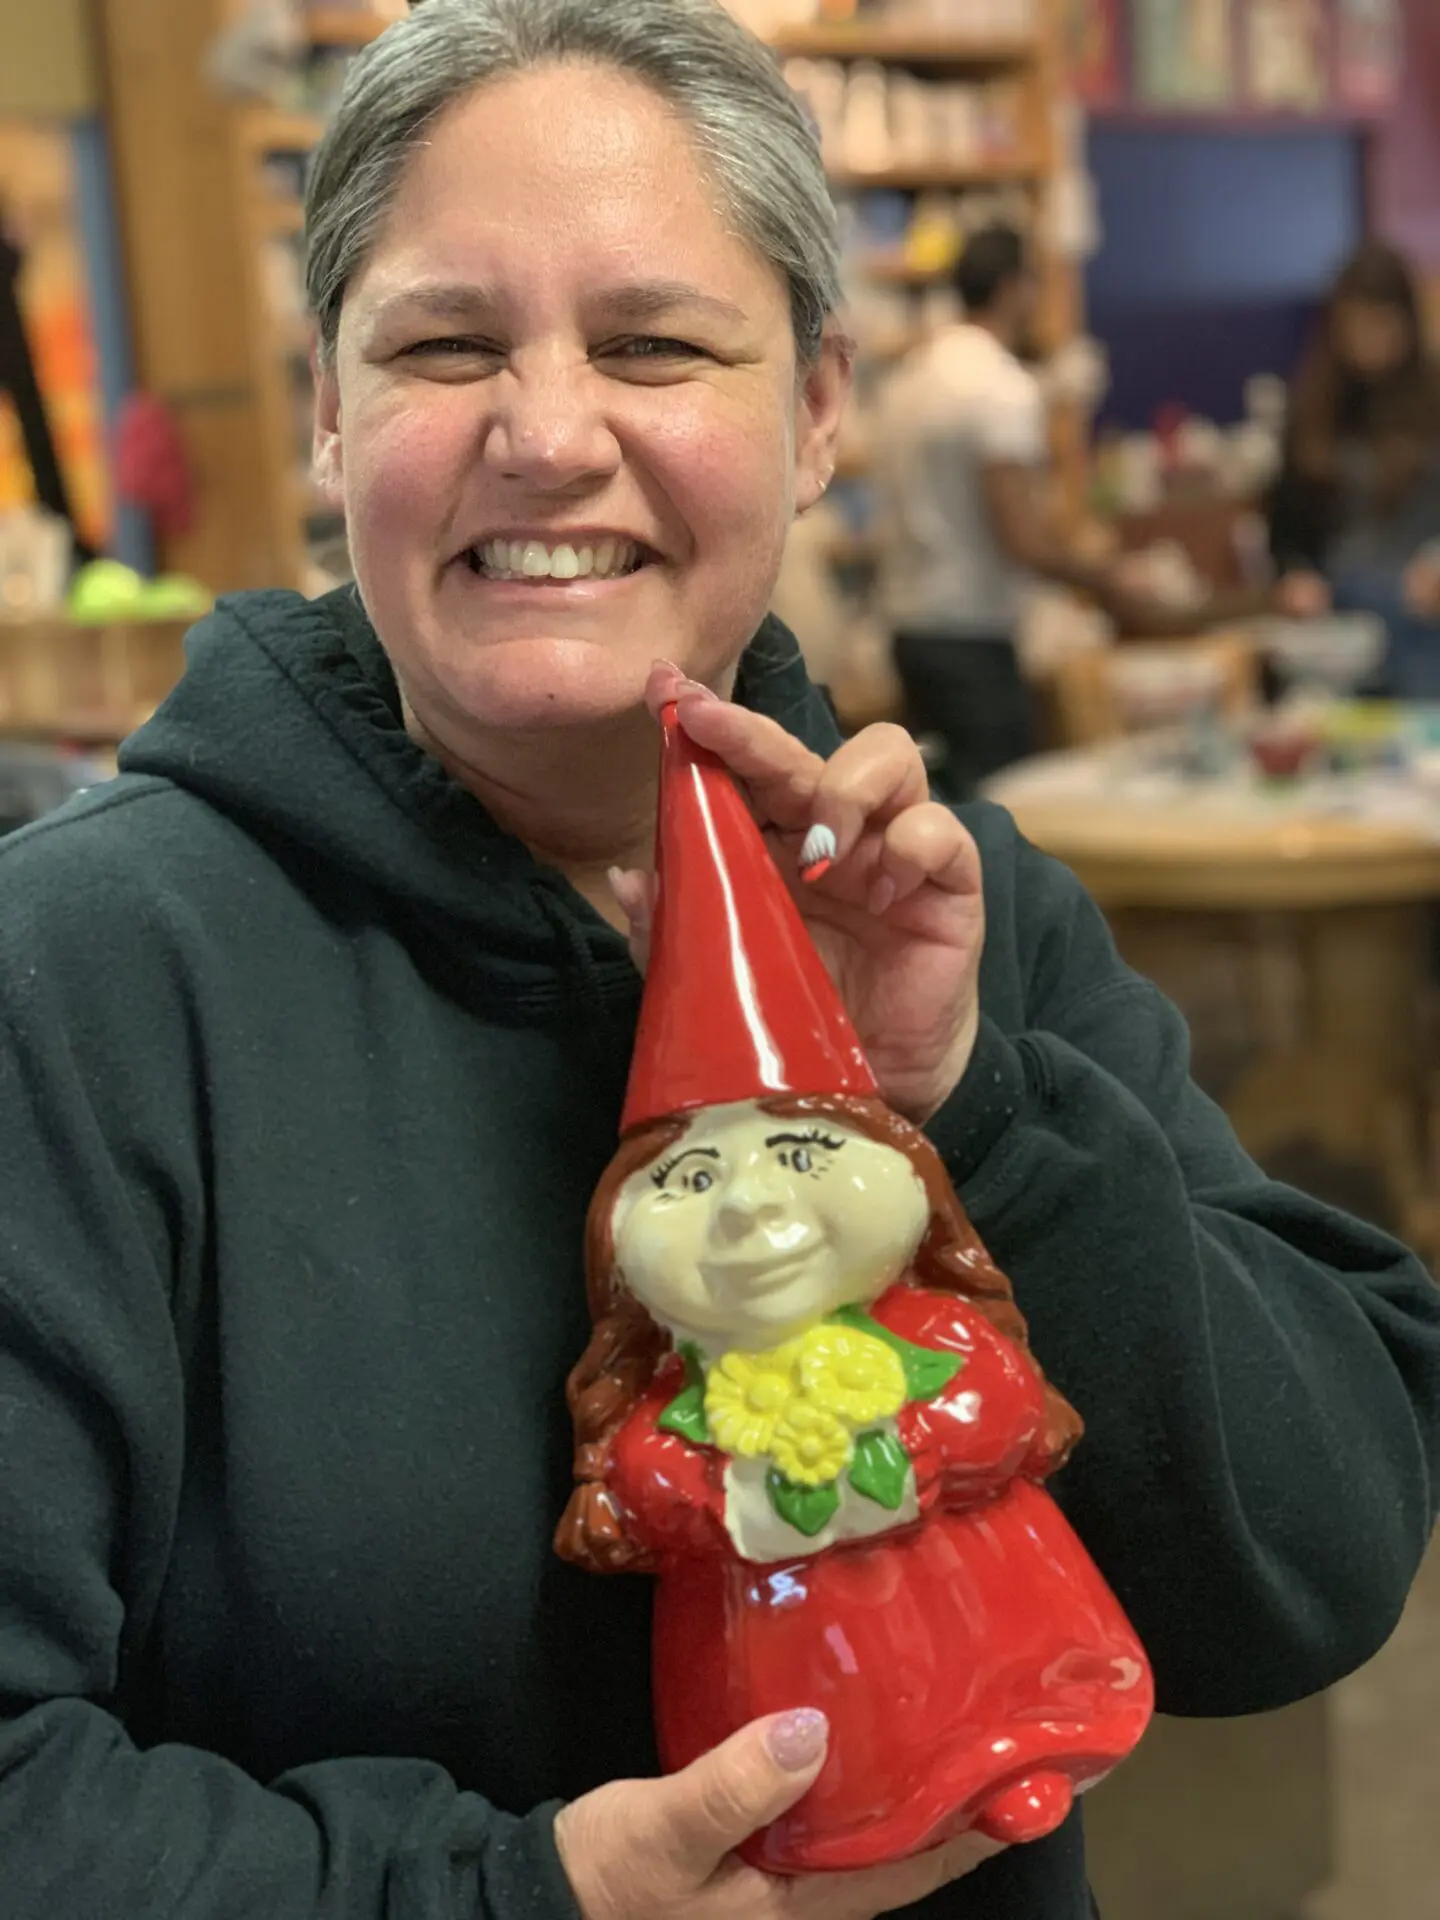 Lady holding a clay toy